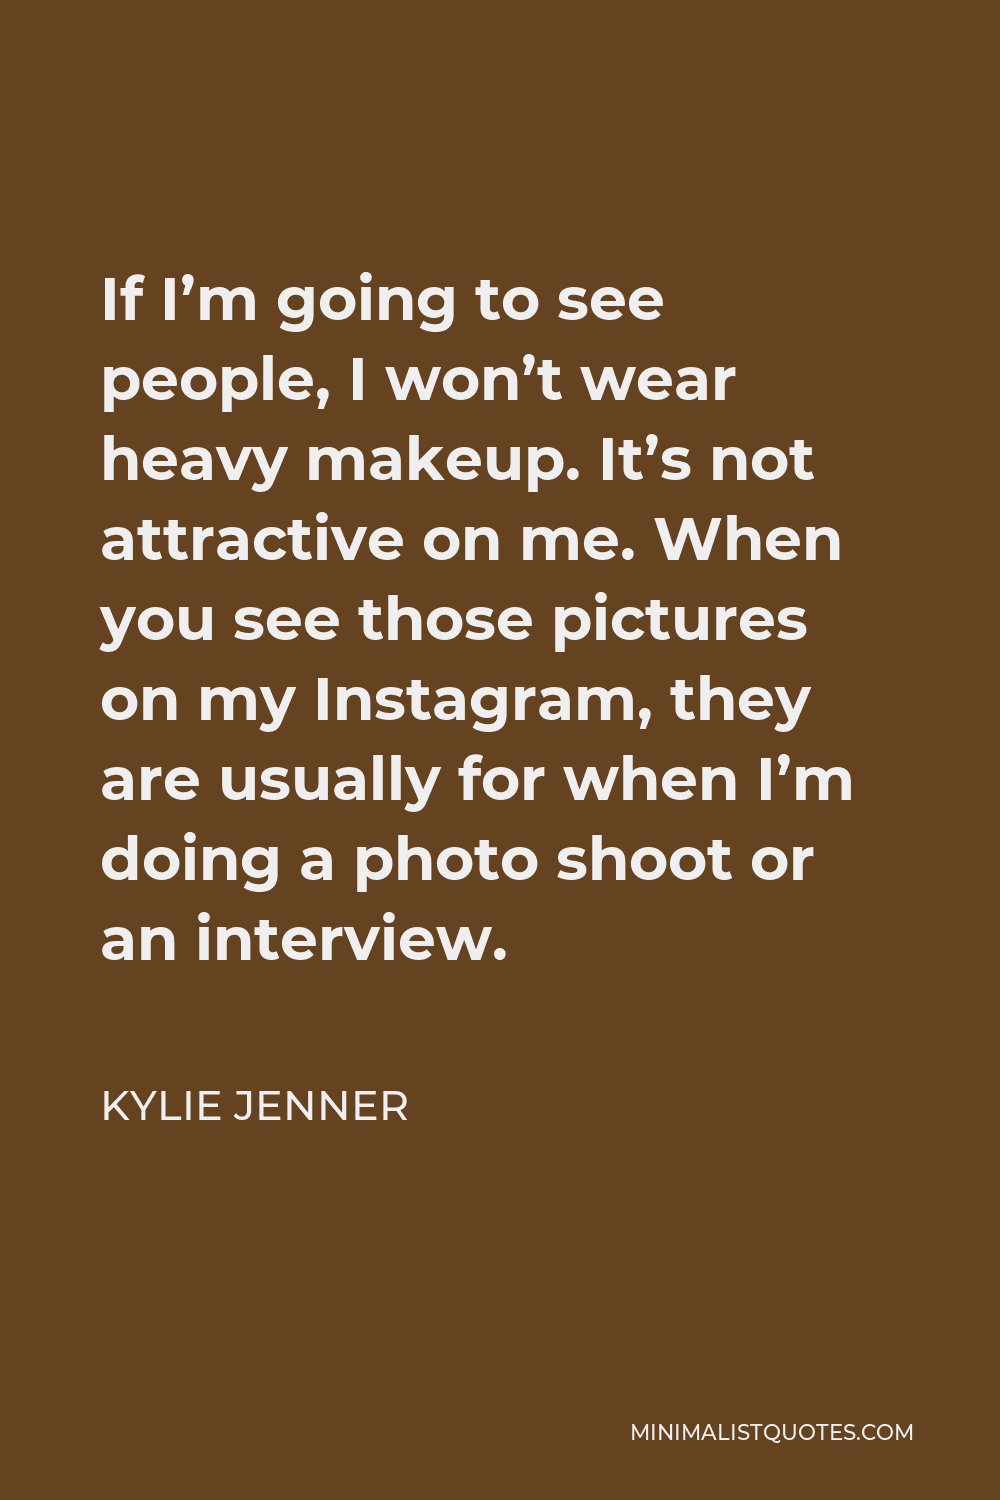 Kylie Jenner Quote - If I’m going to see people, I won’t wear heavy makeup. It’s not attractive on me. When you see those pictures on my Instagram, they are usually for when I’m doing a photo shoot or an interview.